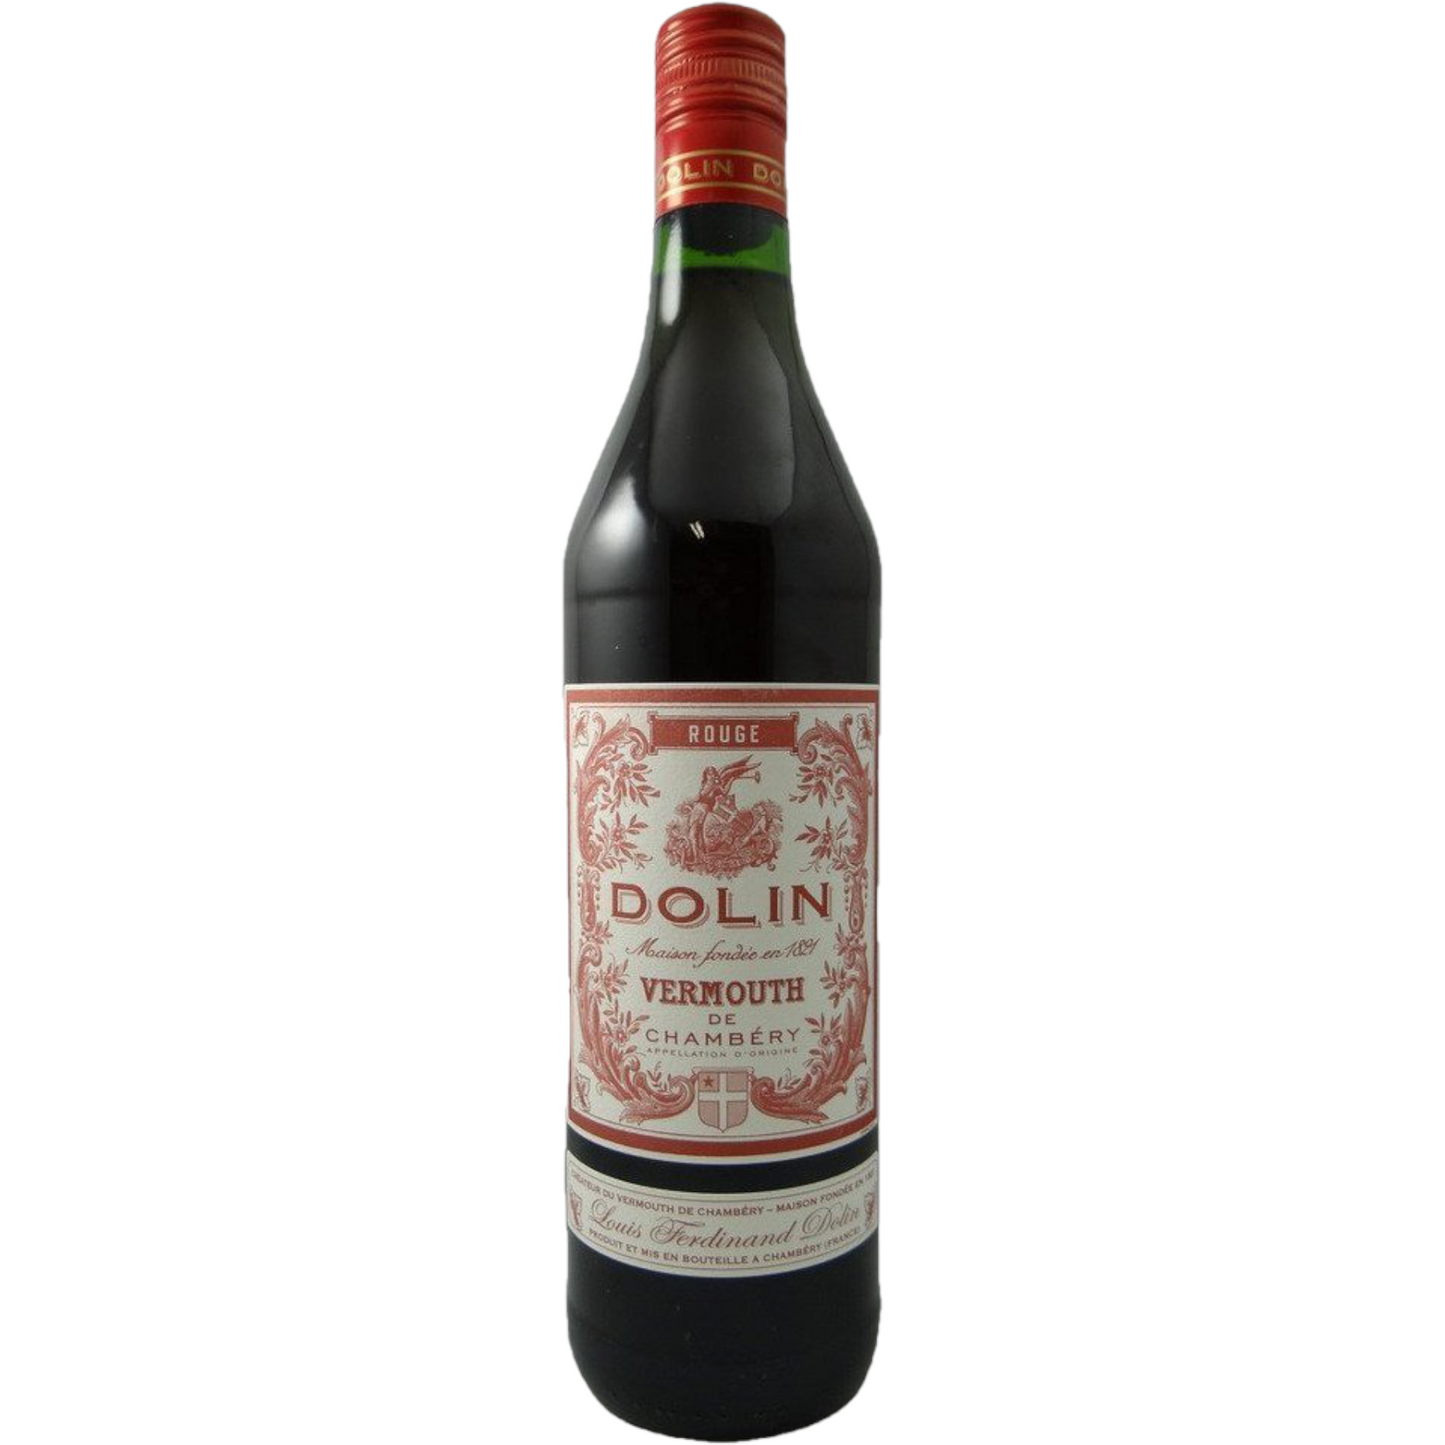 DOLIN VERMOUTH ROUGE